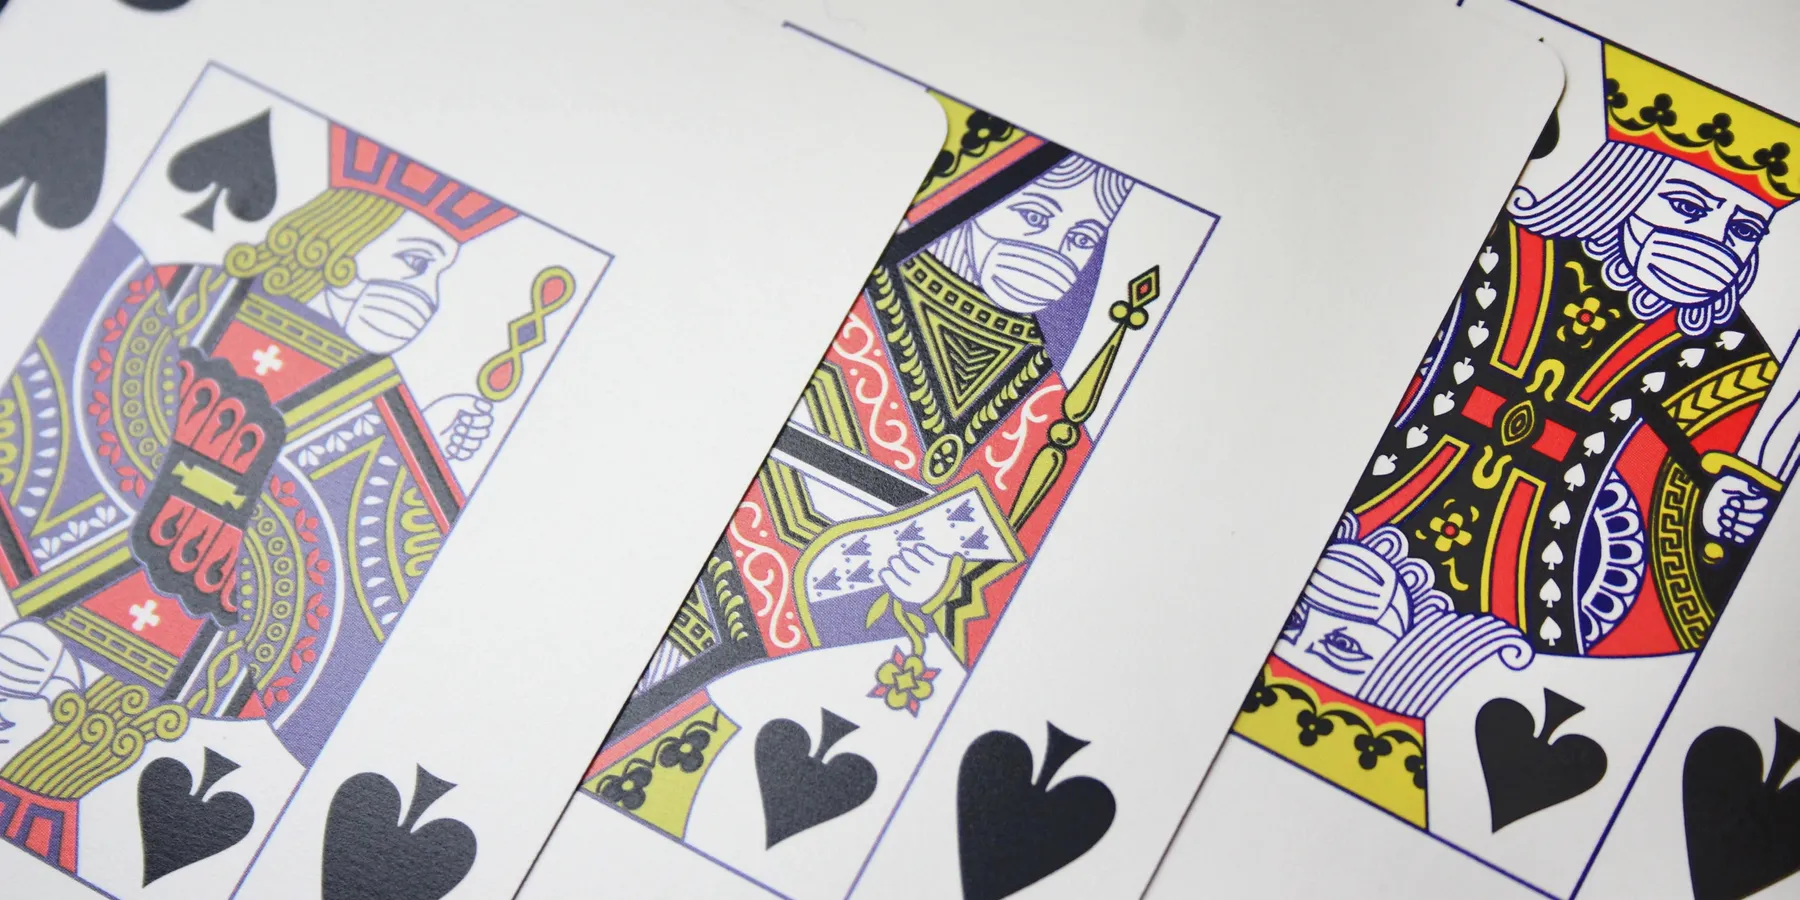 New Playing Cards Take Some of the Nastiness Out of Live Poker